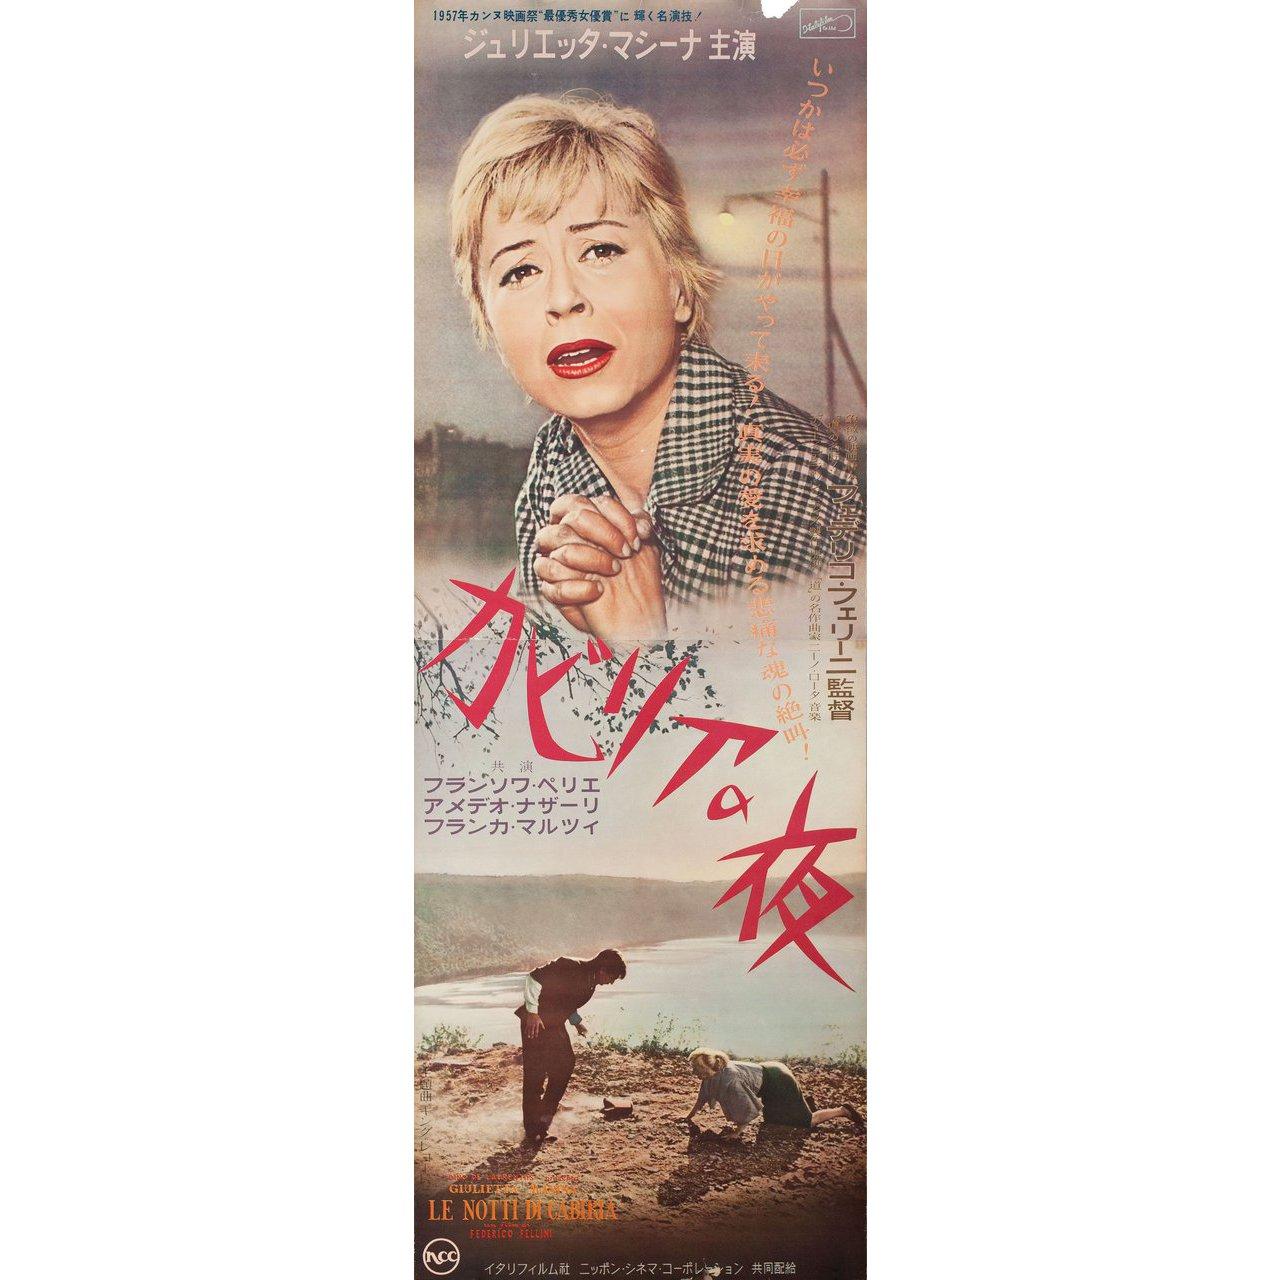 Original 1957 Japanese STB tatekan poster for the film nights of Cabiria (Le notti di Cabiria) directed by Federico Fellini with Giulietta Masina / Francois Perier / Franca Marzi / Dorian Gray. Very good-fine condition, folded with piece missing.